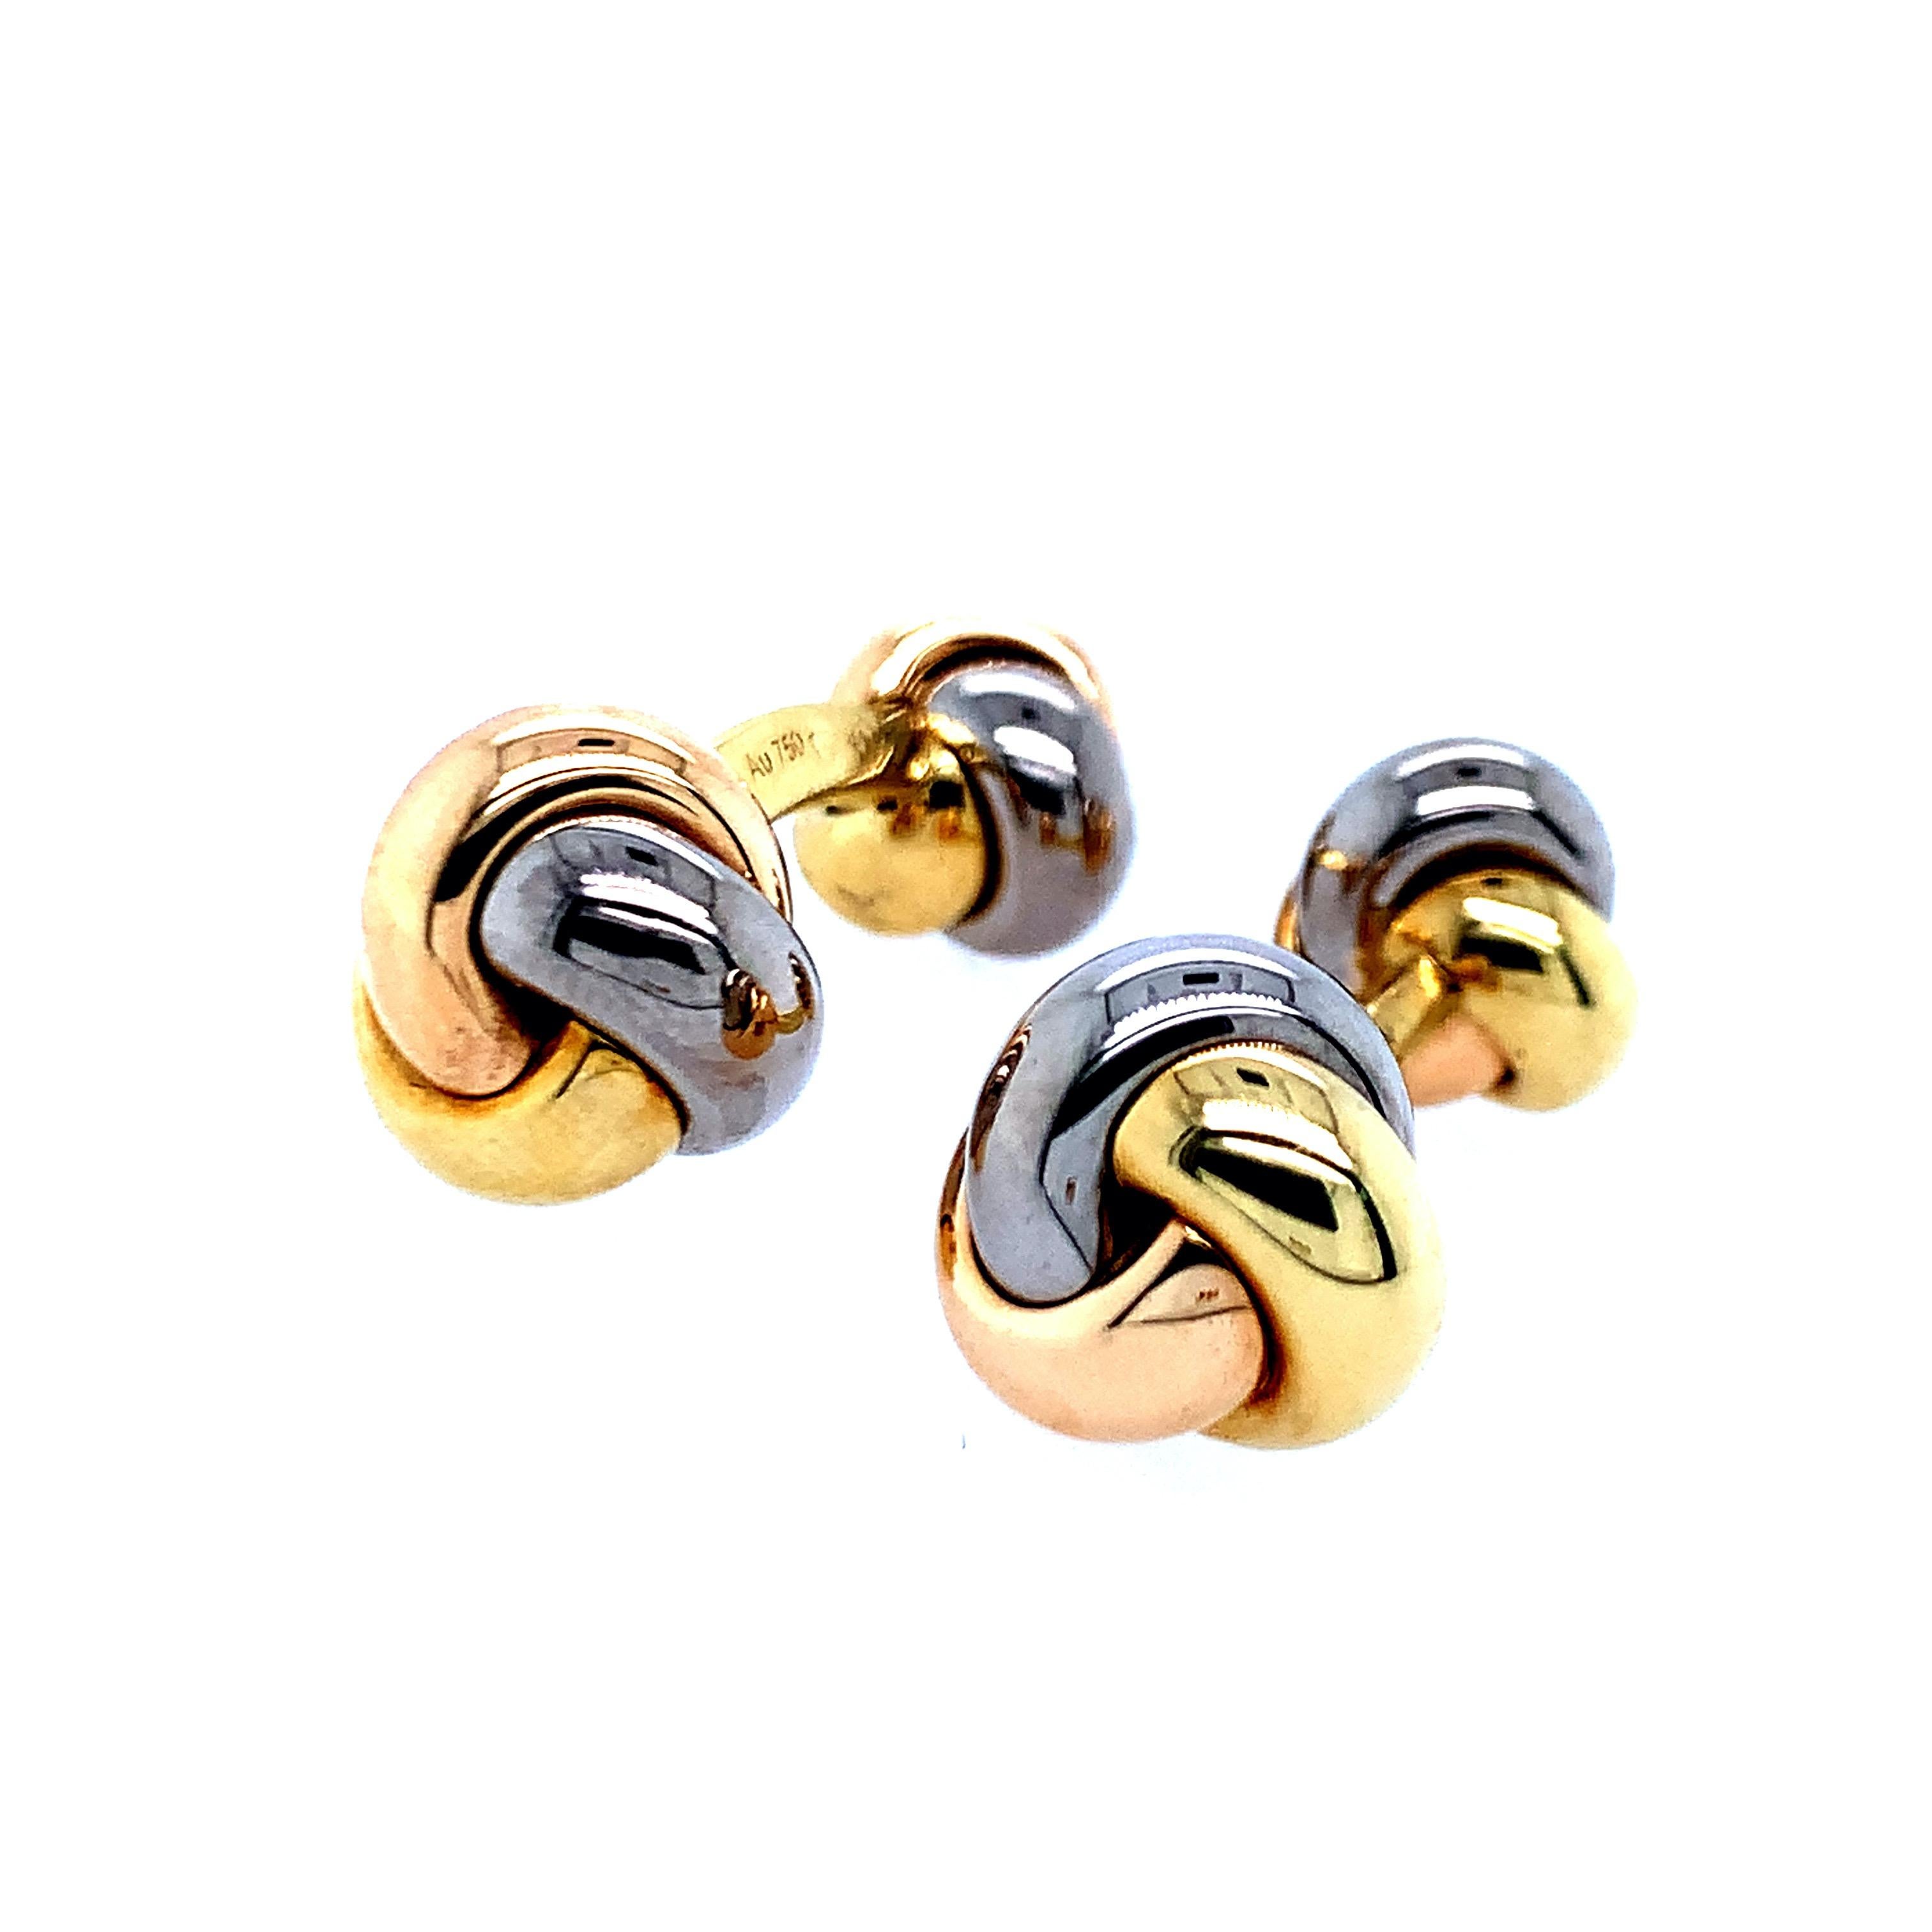 Created by Cartier, these set of cufflinks consists of three different kinds of 18 karat gold: yellow, white, and rose. They are knotted together on both ends of the cufflinks. Total weight: 11.7 grams. Length: 2.9 cm. Made in France.

Serial No.